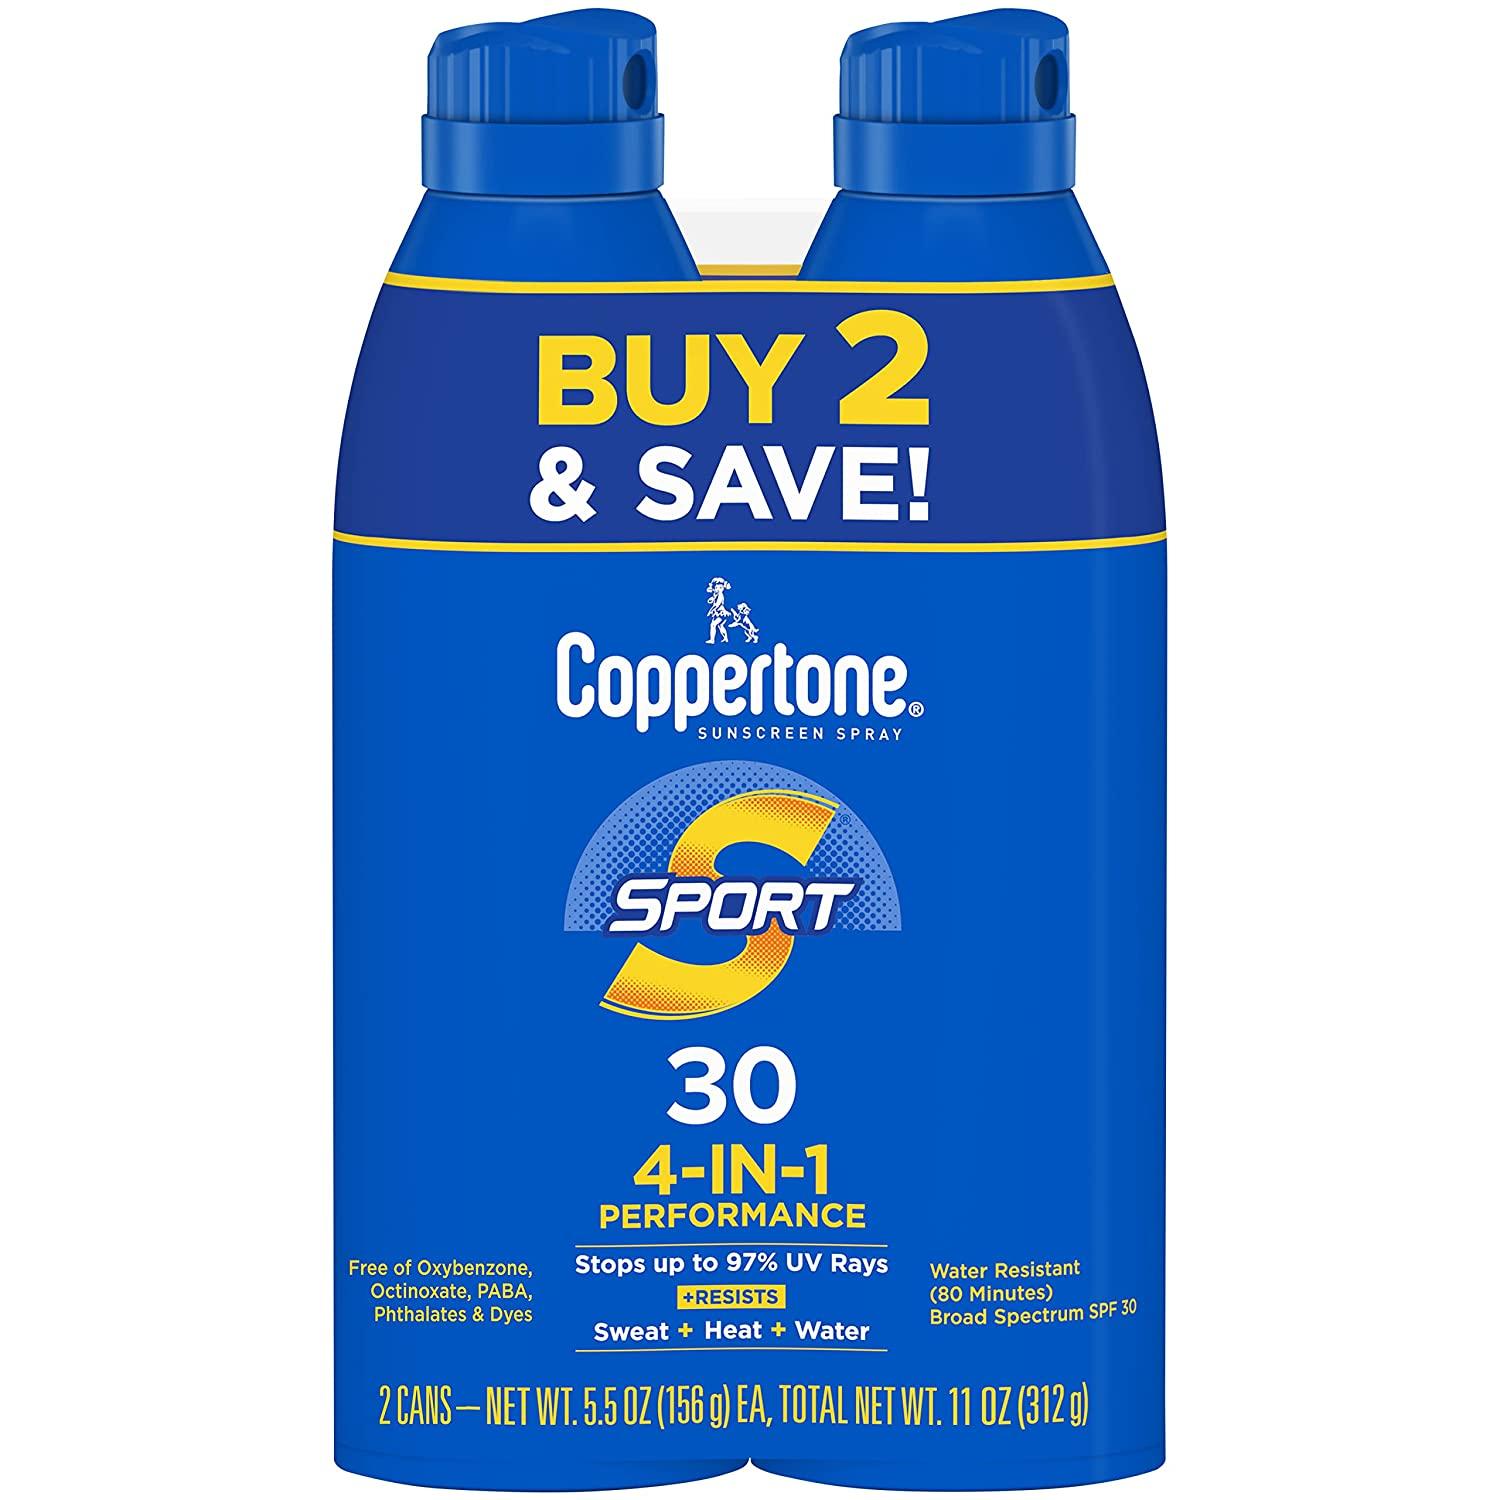 Coppertone Sport Water Resistant Sunscreen Spray Cans 4 Pack for $17.07 Shipped